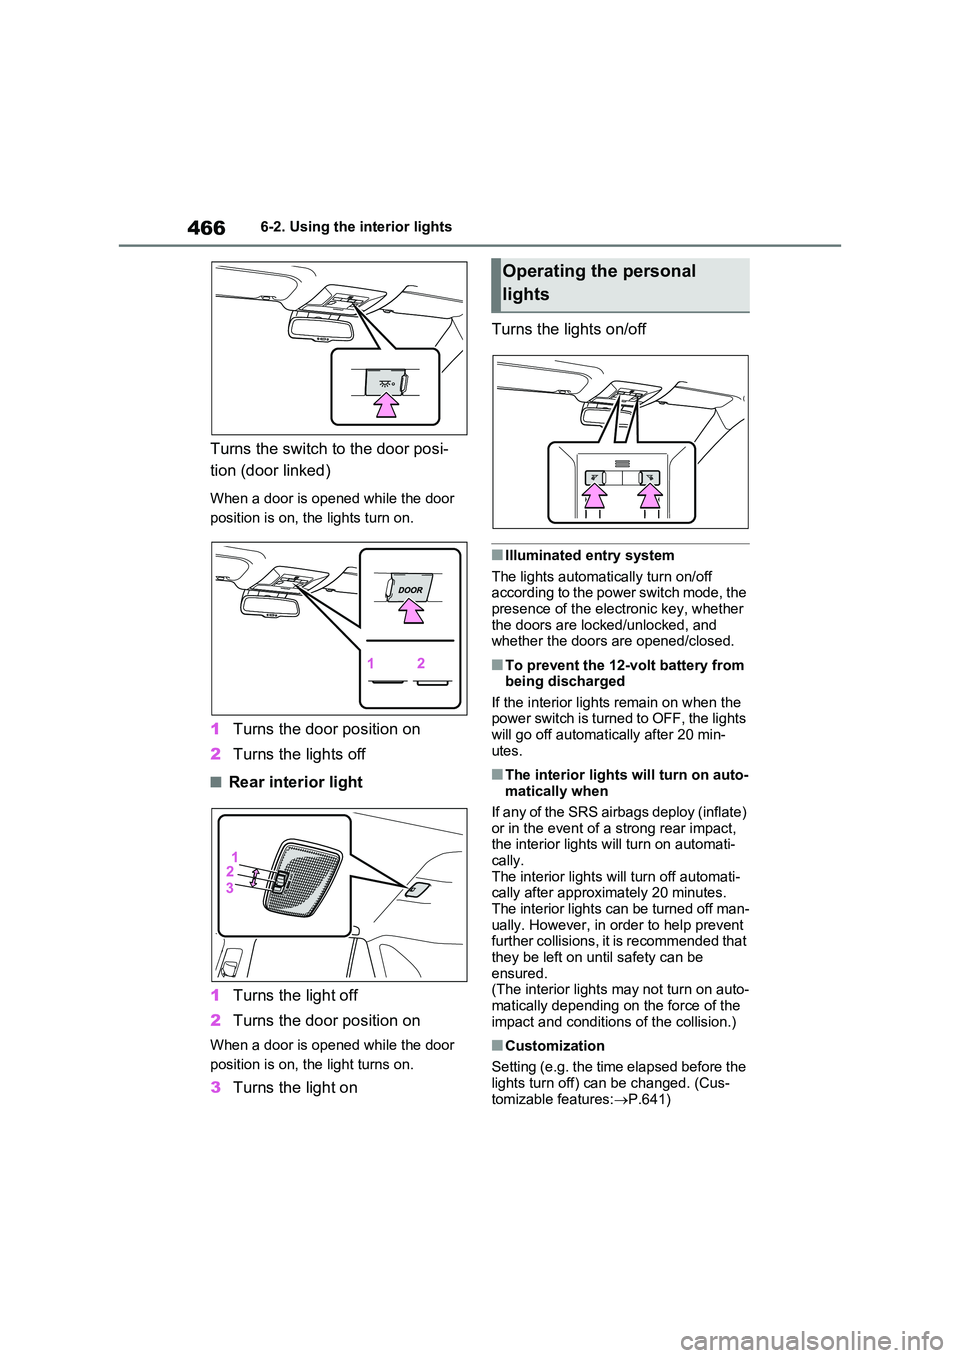 TOYOTA VERSO S 2011  Owners Manual 4666-2. Using the interior lights
Turns the switch to the door posi- 
tion (door linked)
When a door is opened while the door  
position is on, the lights turn on.
1 Turns the door position on 
2 Turn